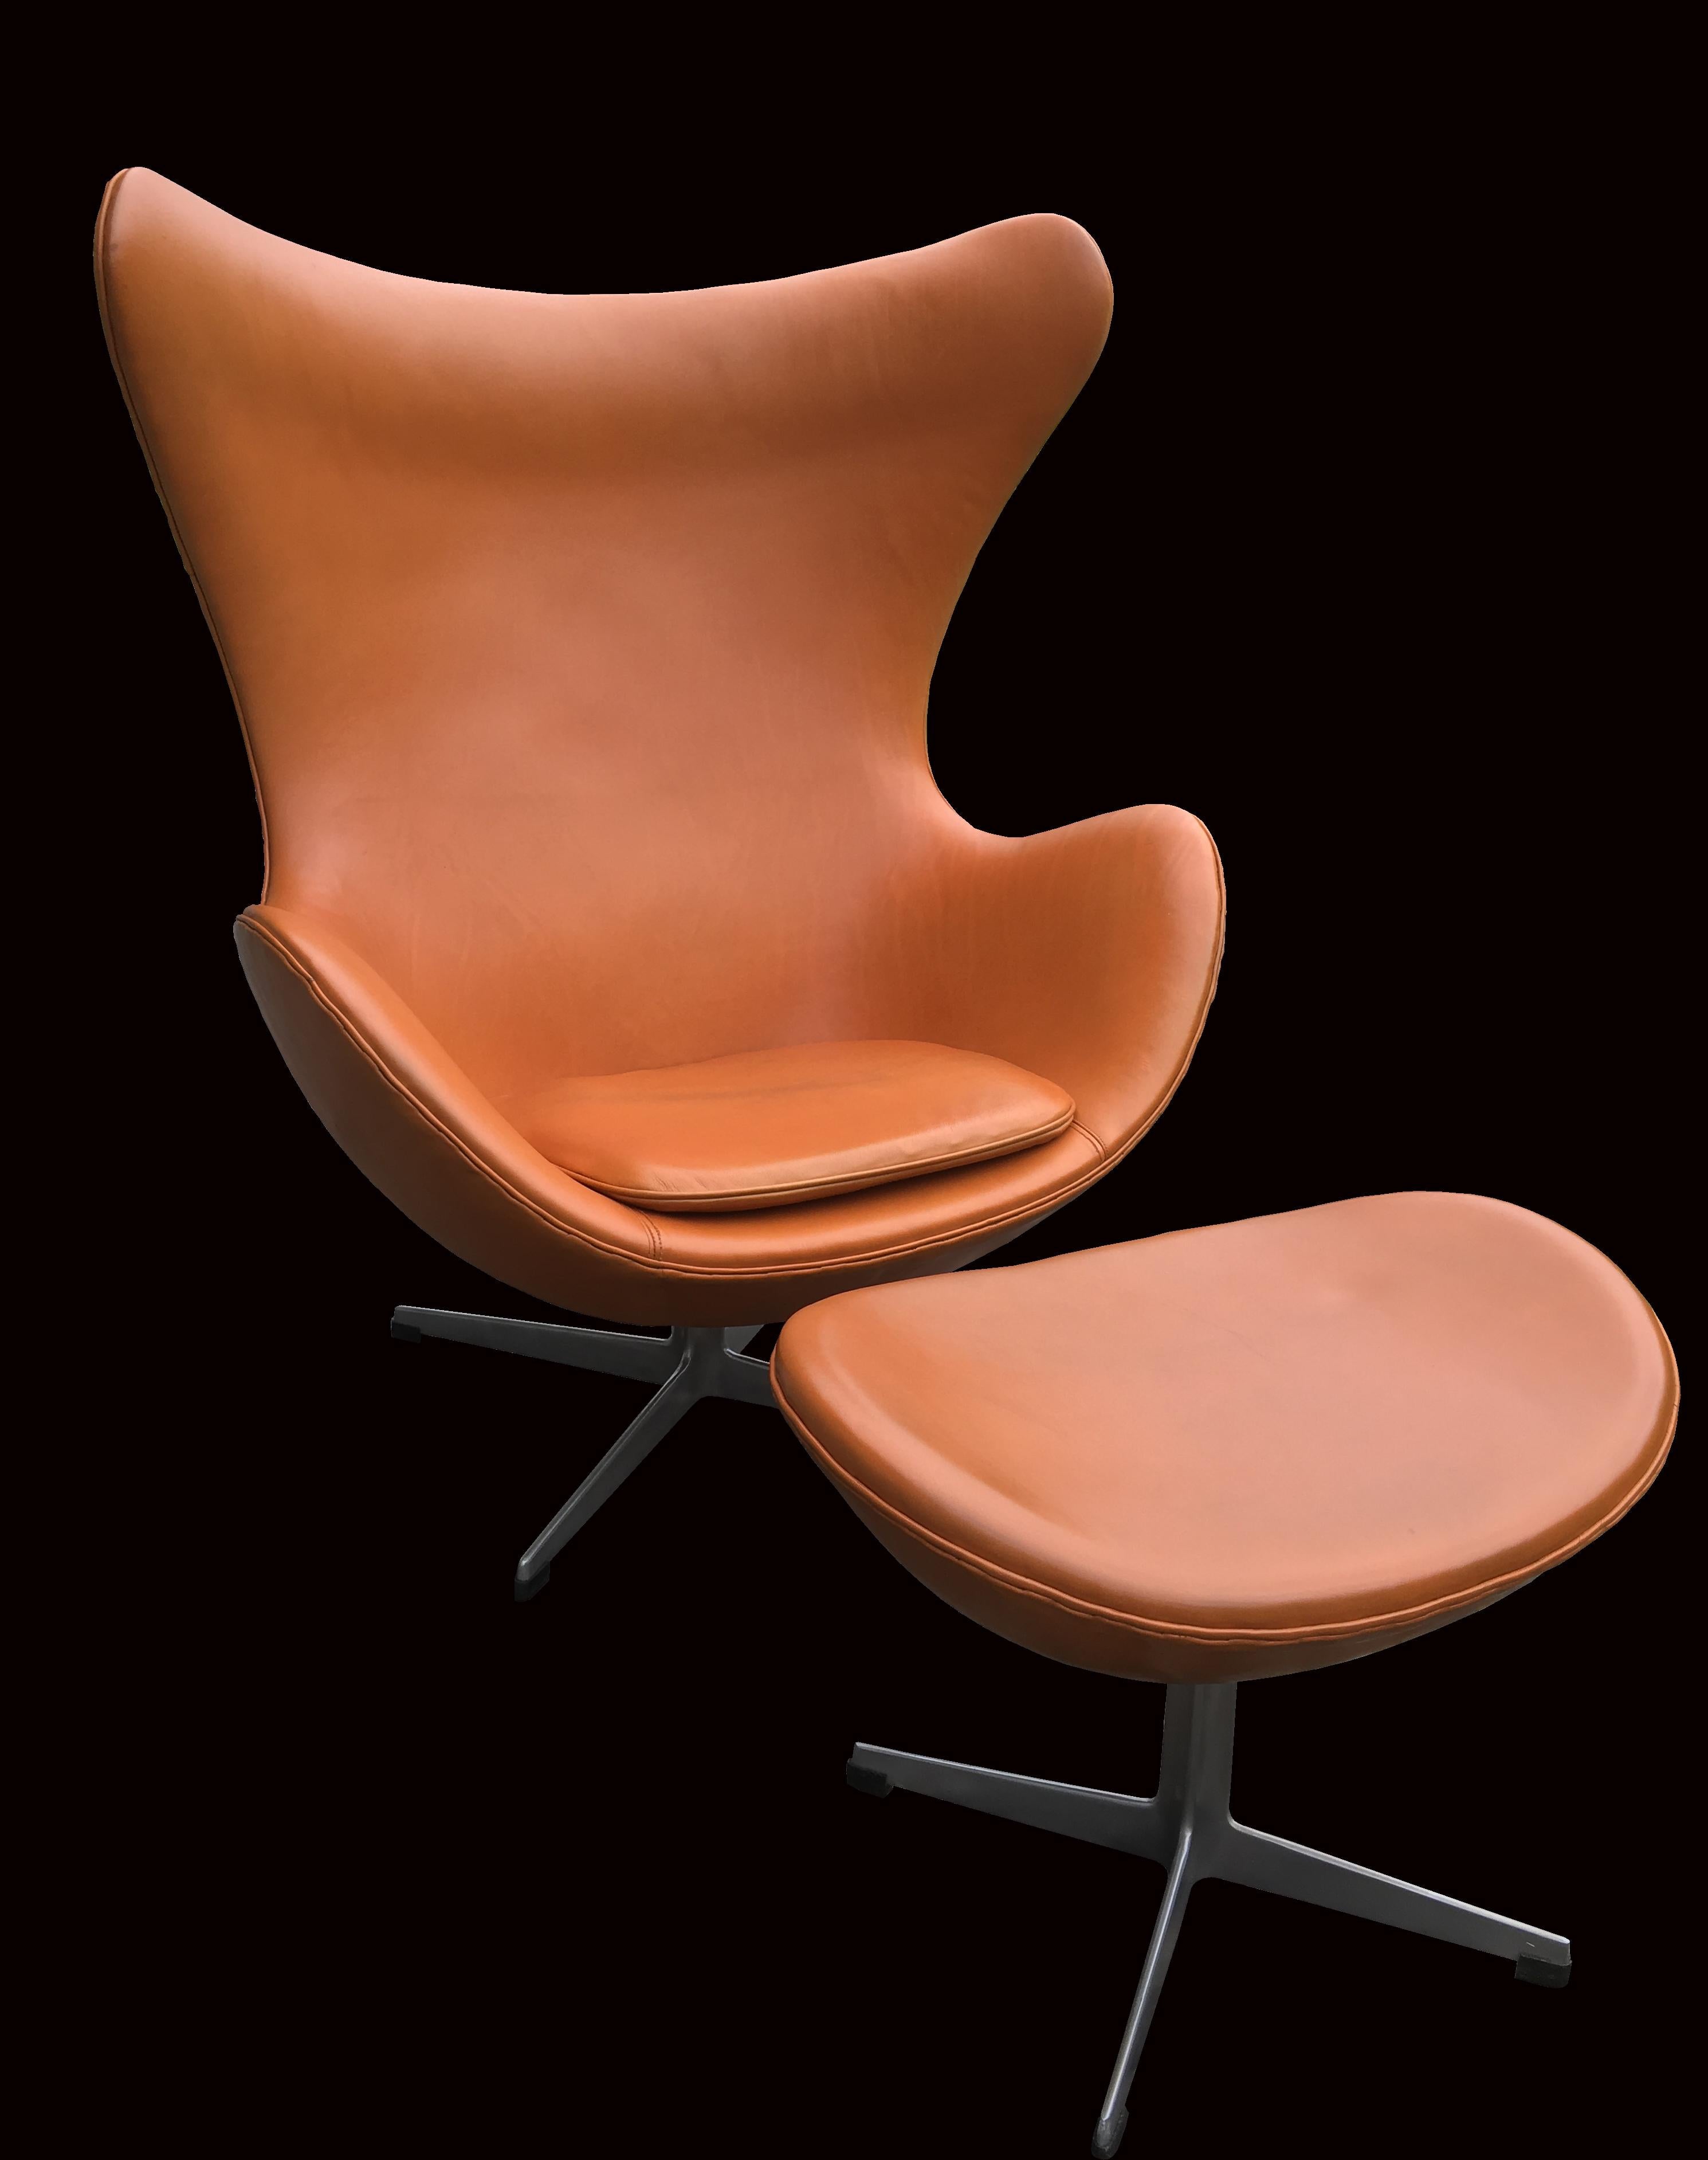 A very nice example of one of the most well known modern designs, the egg chair by Arne Jacobsen in tan Leather. Exclusively designed originally for the SAS Hotel in Copenhagen, but proving so popular that they were put into production soon after.